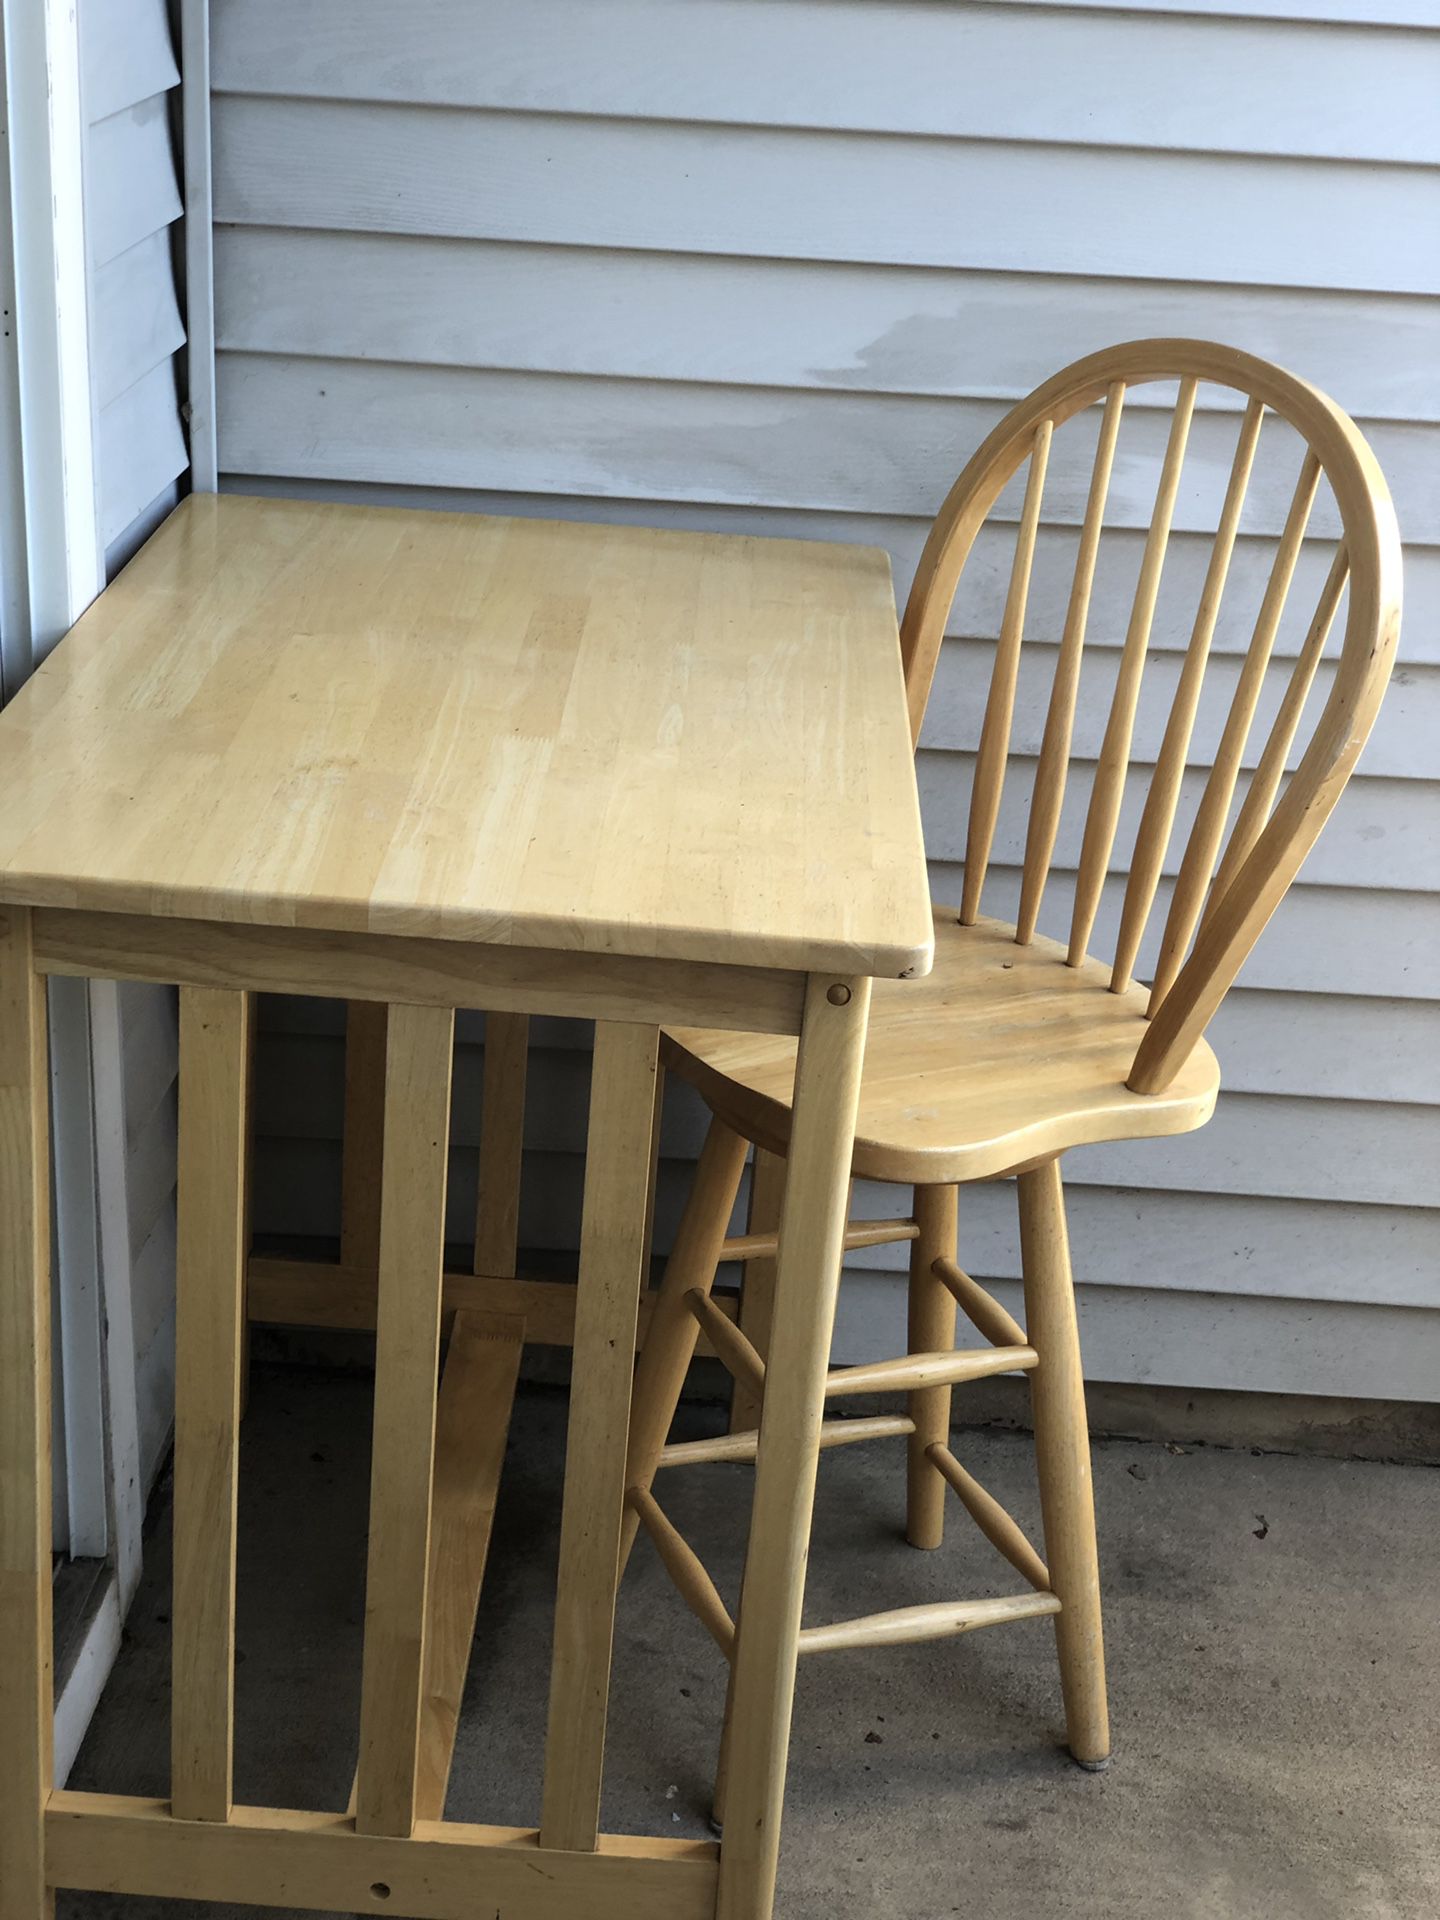 Dining table with 2 chairs for a small kitchen or Studio!